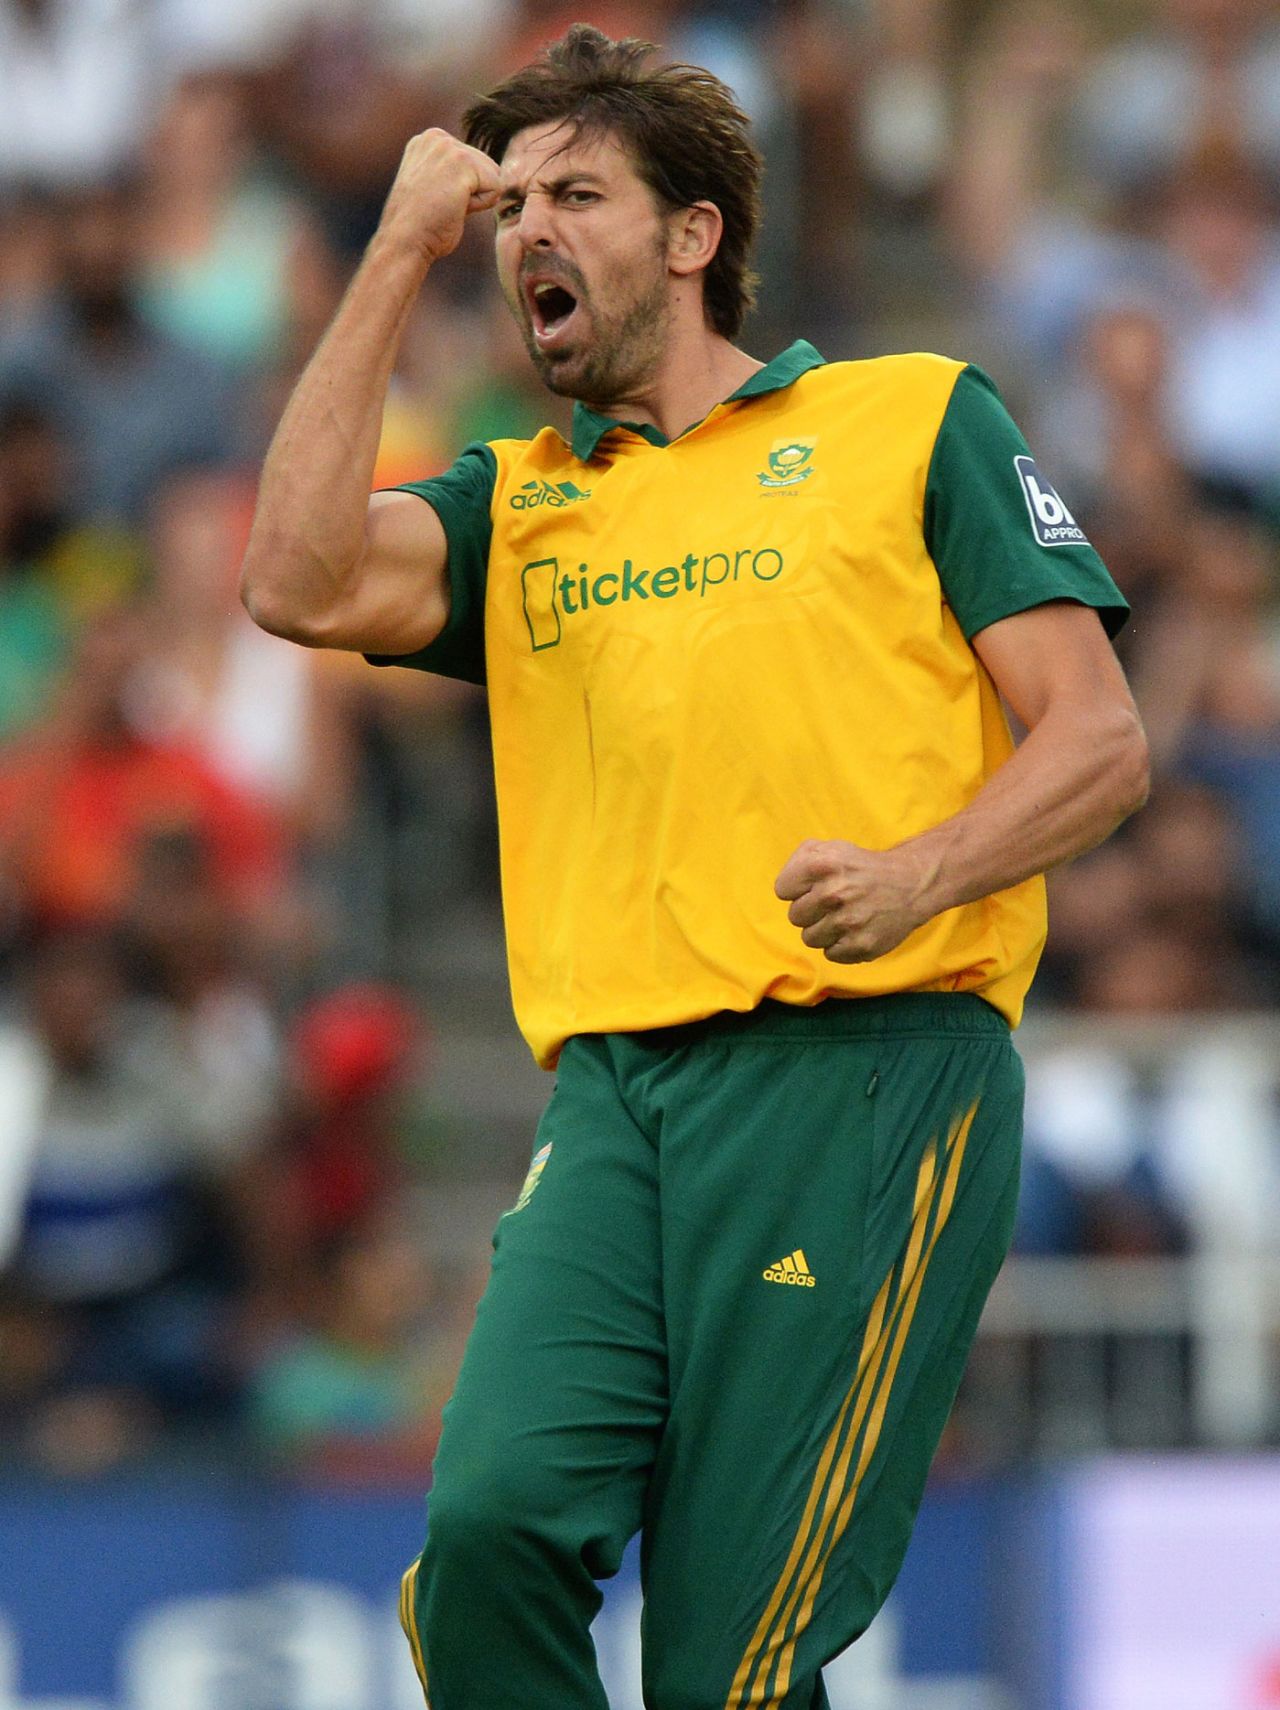 David Wiese celebrates a wicket, South Africa v West Indies, 2nd T20, Johannesburg, January 11, 2015